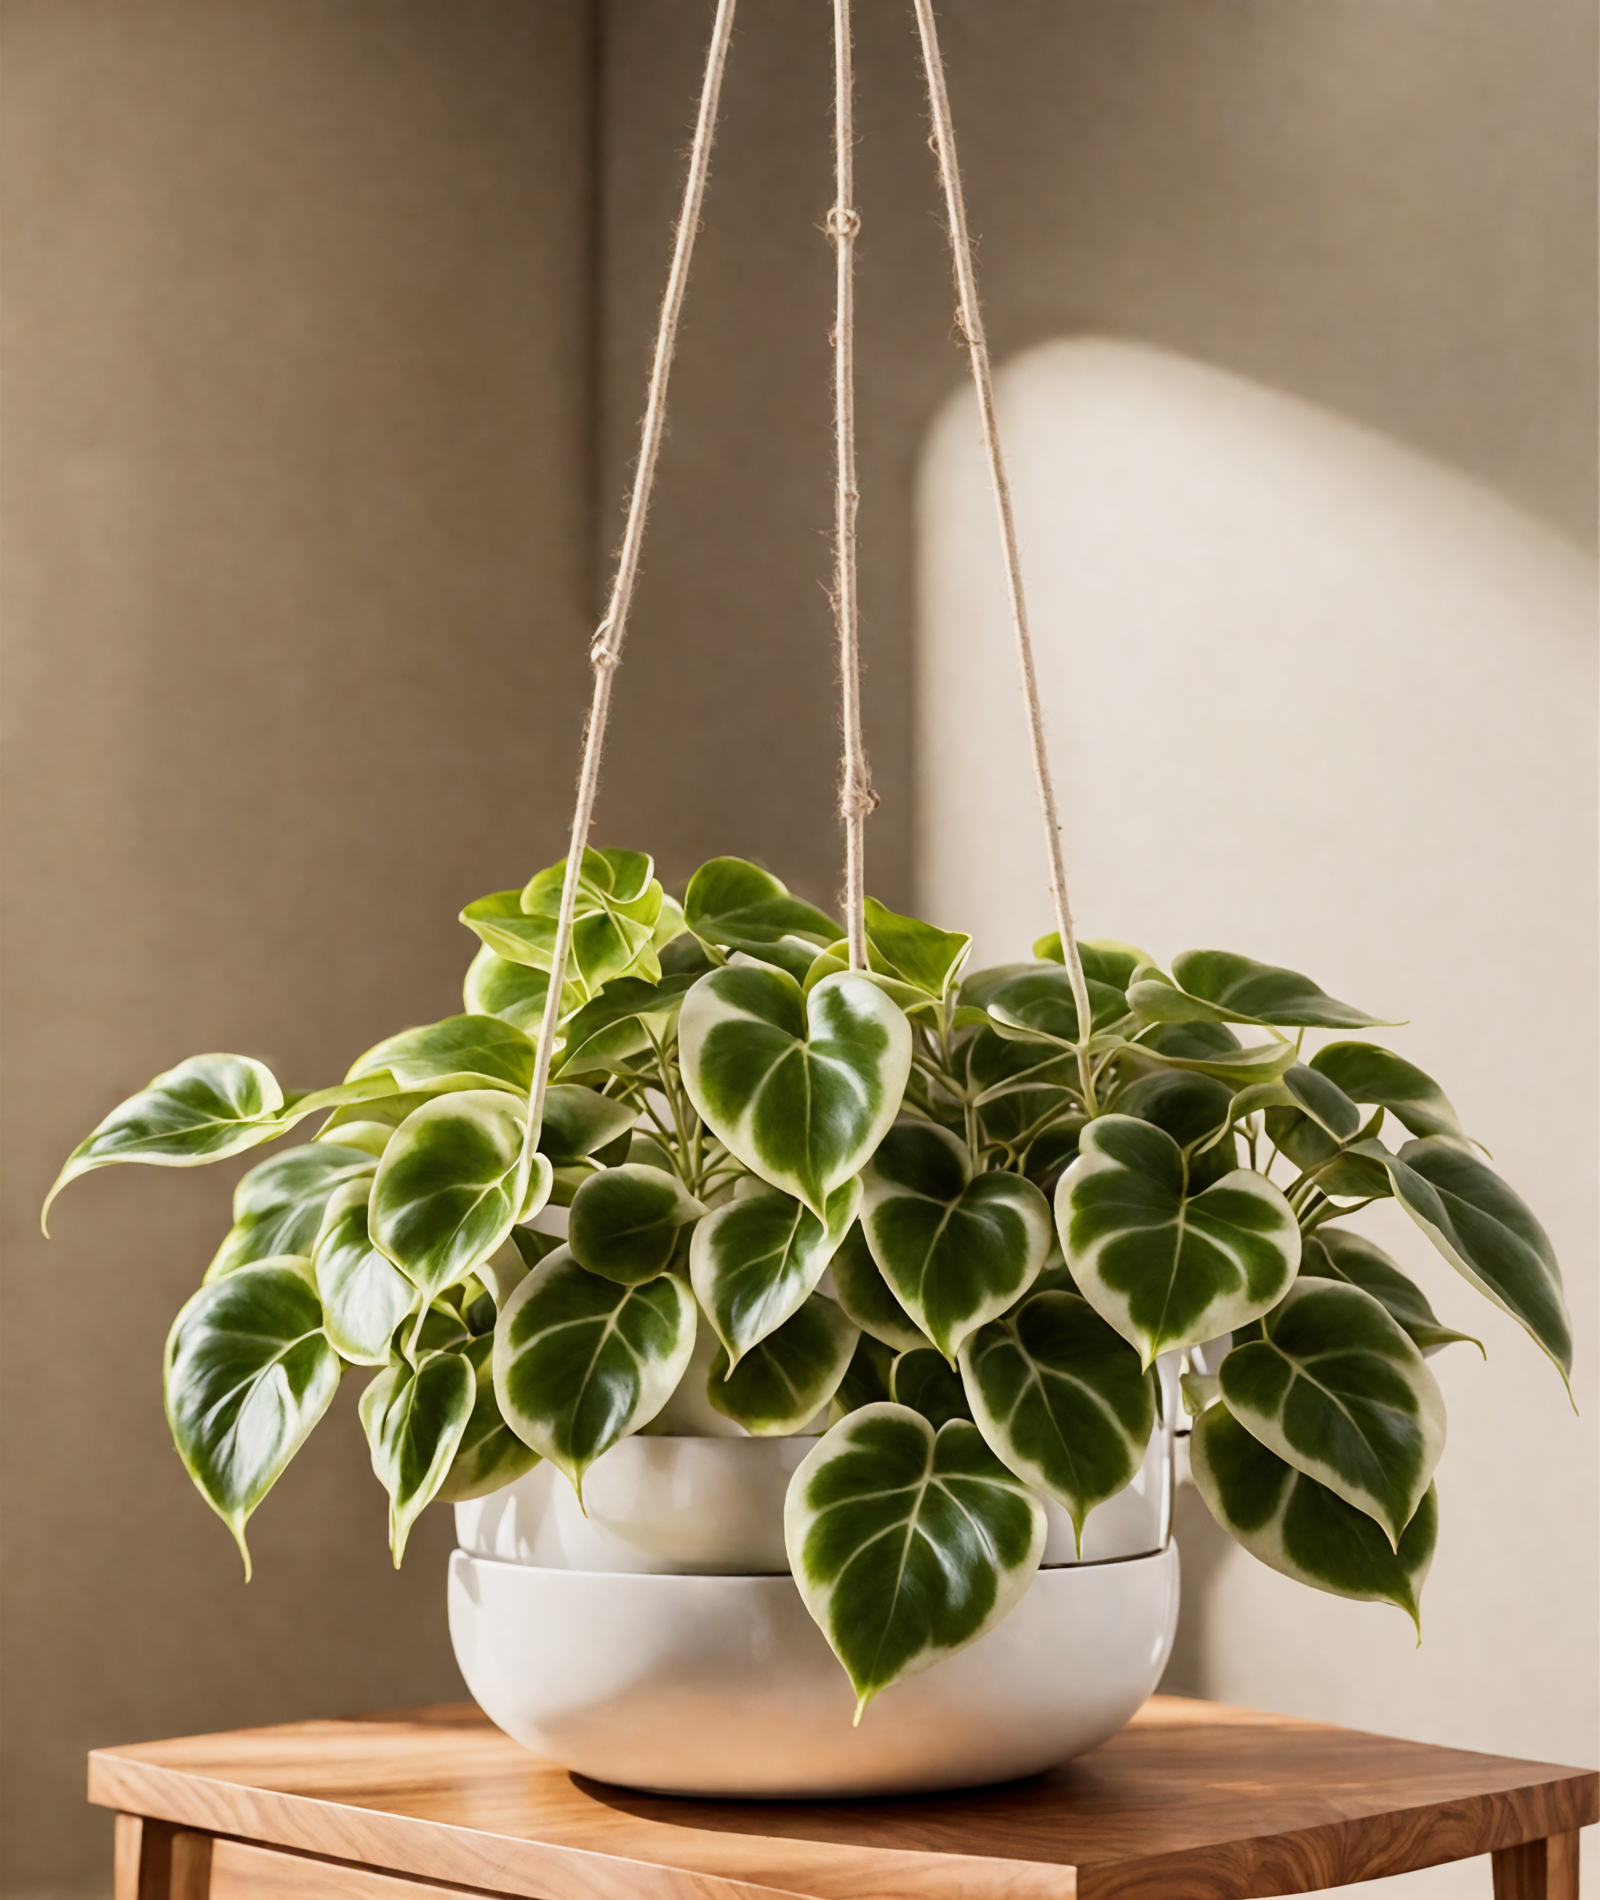 Peperomia serpens with heart-shaped leaves on a wooden table, clear indoor lighting.